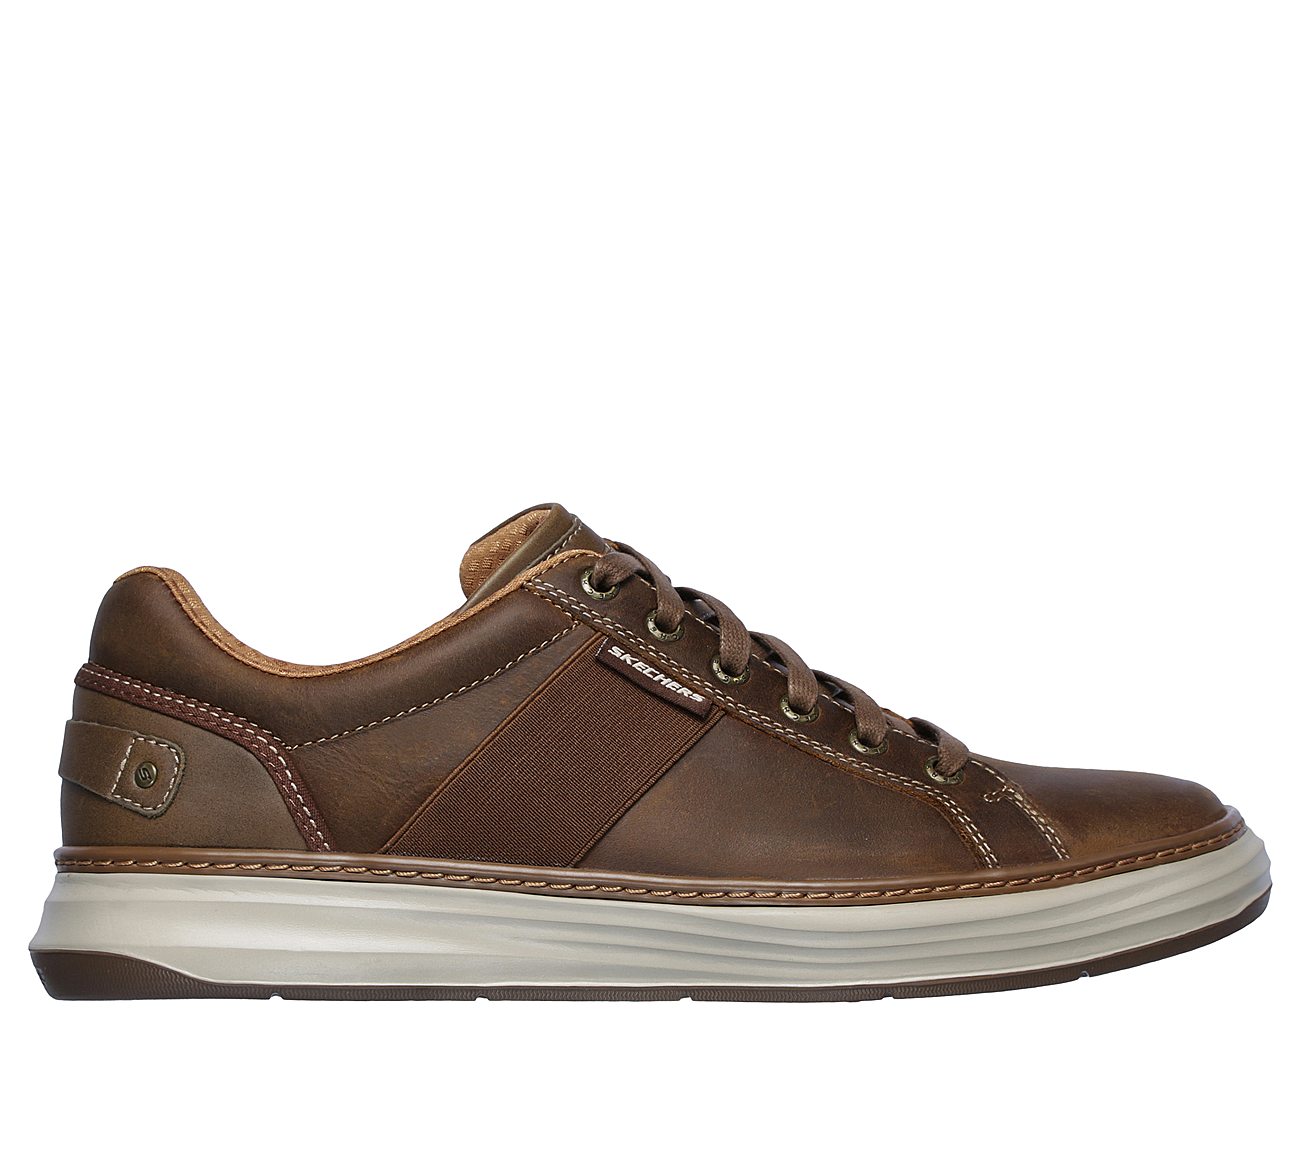 skechers brown shoes Sale,up to 73 